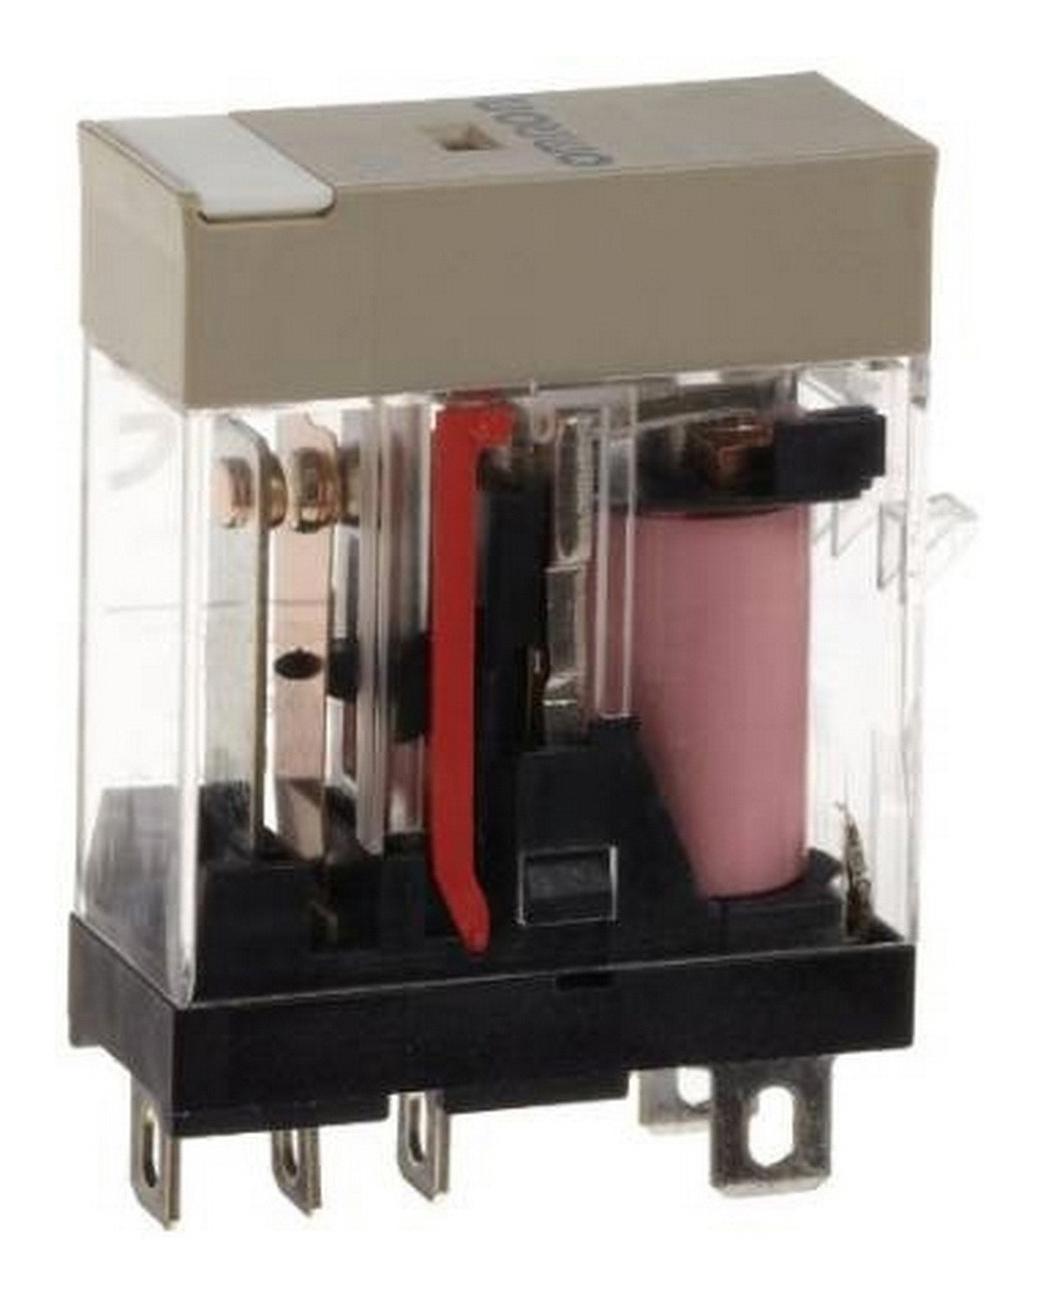 G2R-1-S 24VAC (S) POWER - GENERAL PURPOSE RELAYS OMRON